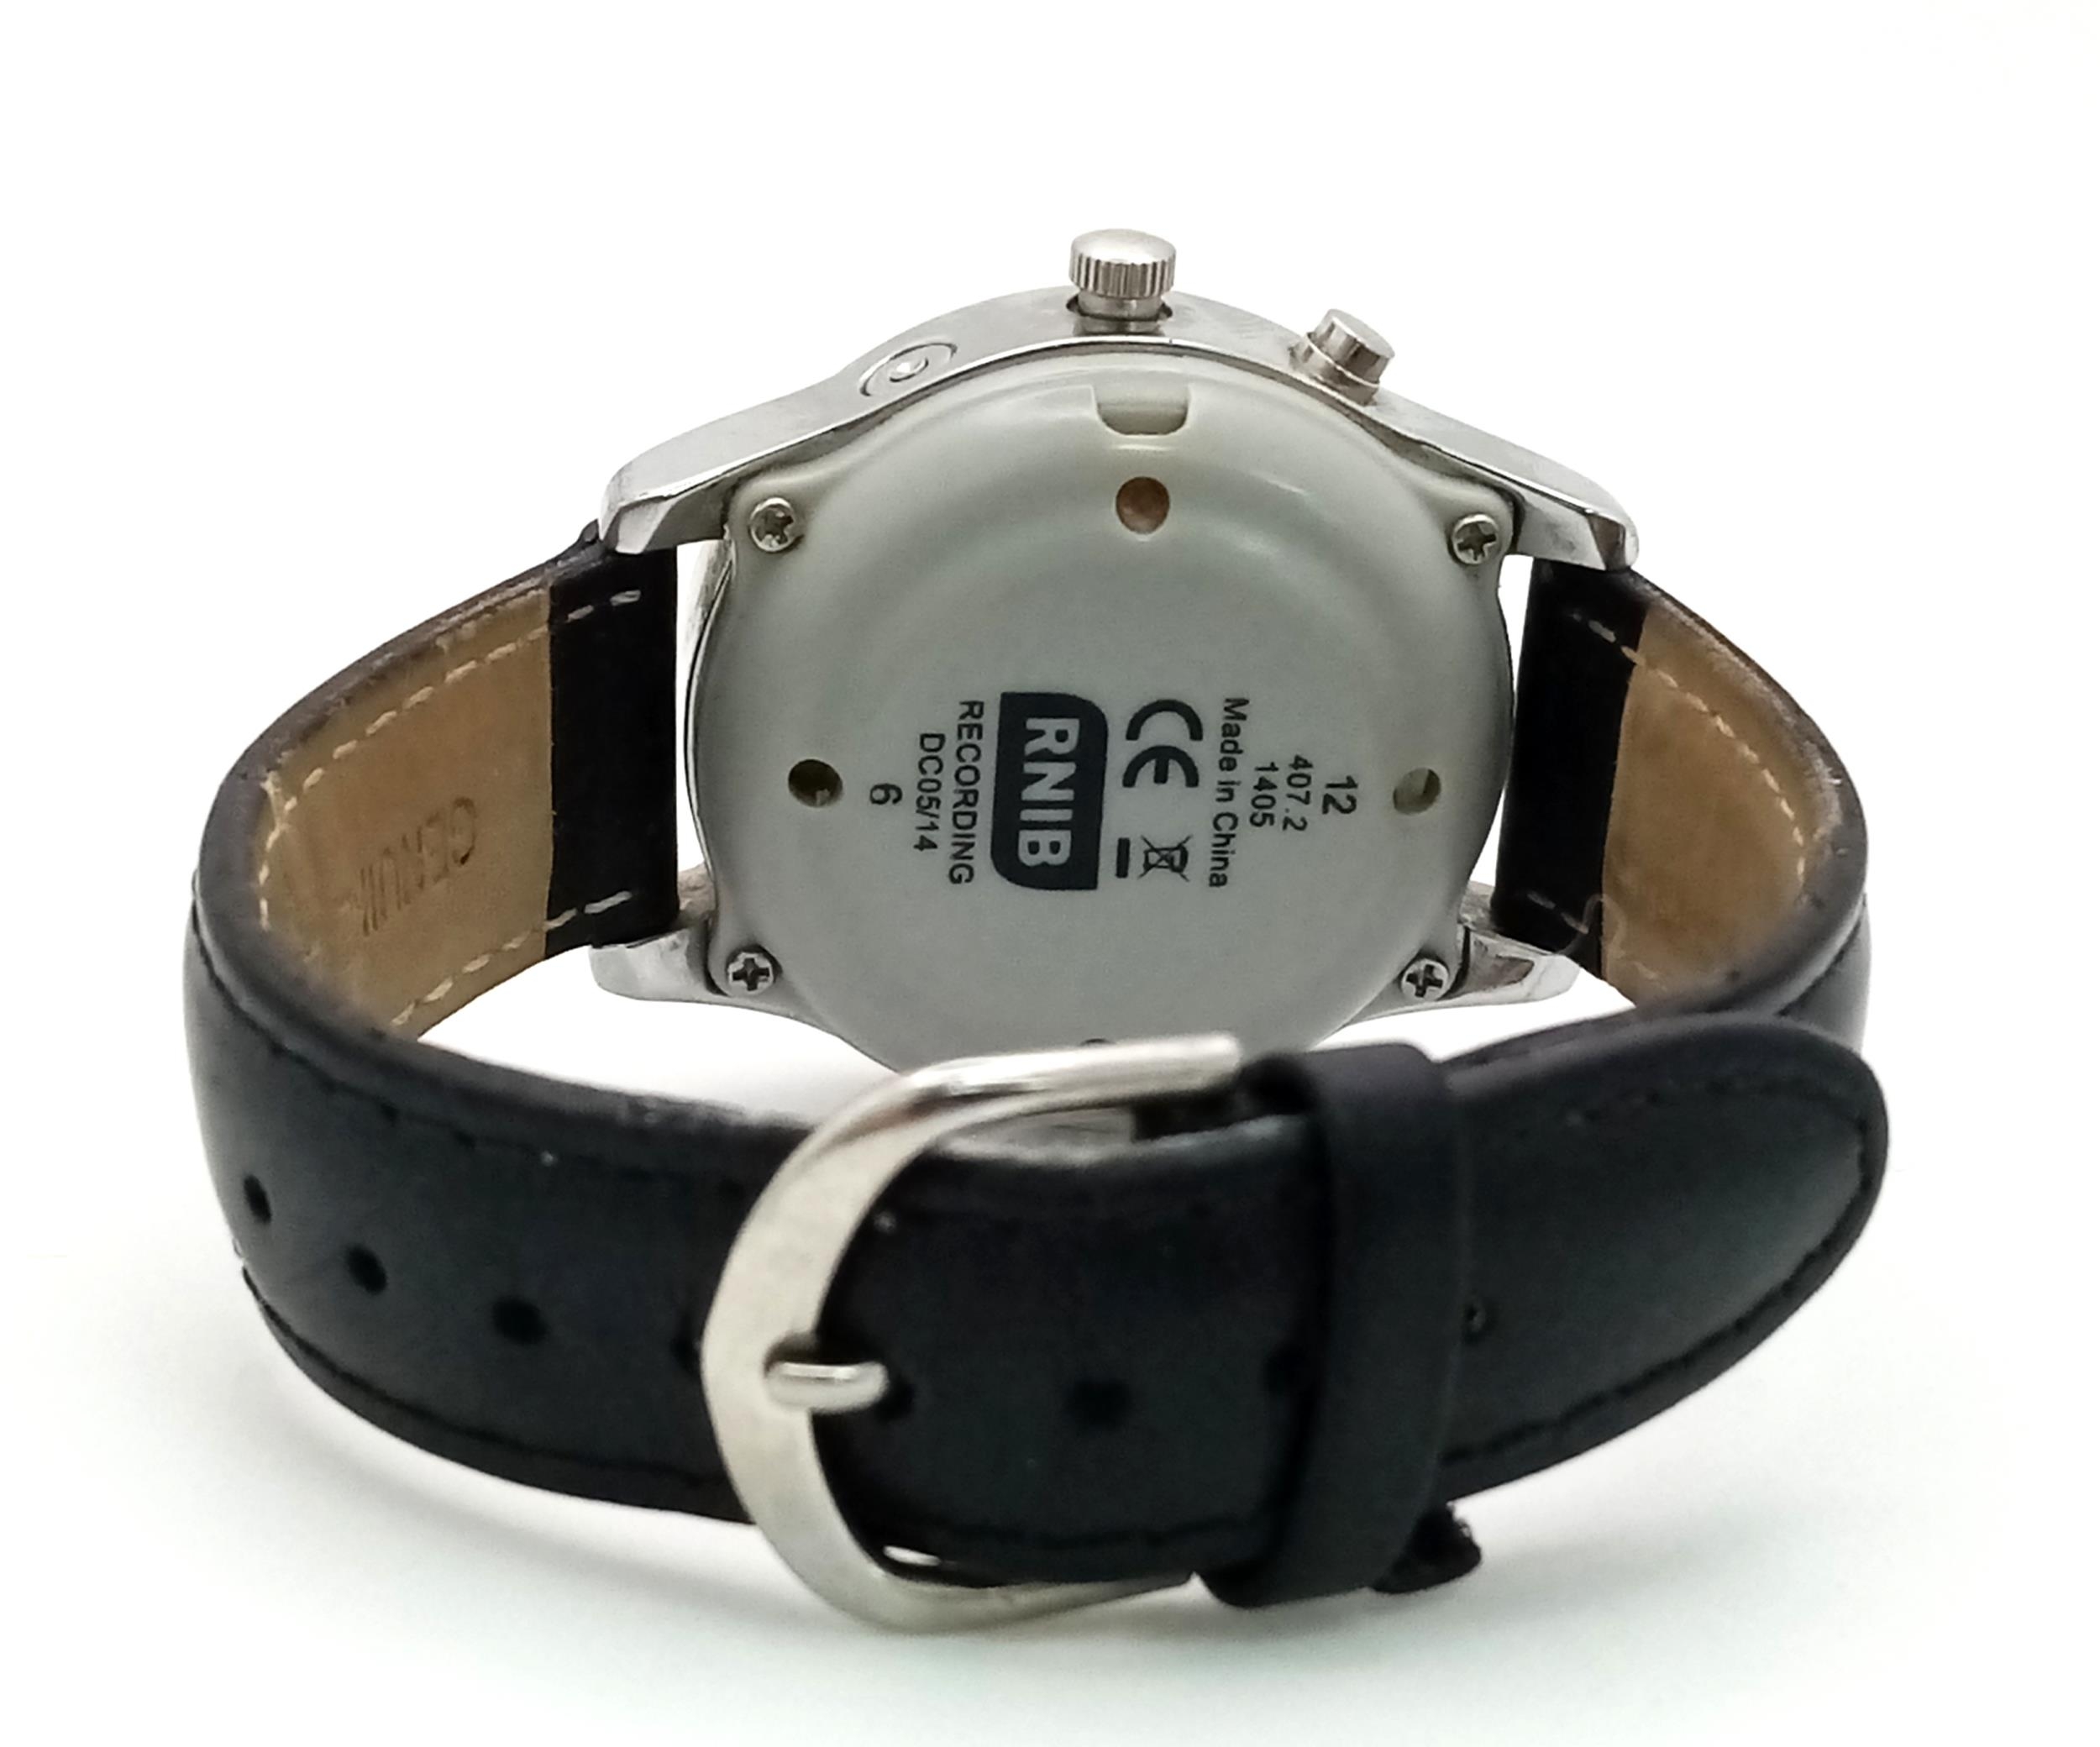 A Very Interesting and Scarce Vintage Lifemax Atomic Talking Watch with Radio Signal Updated Timing. - Image 5 of 5